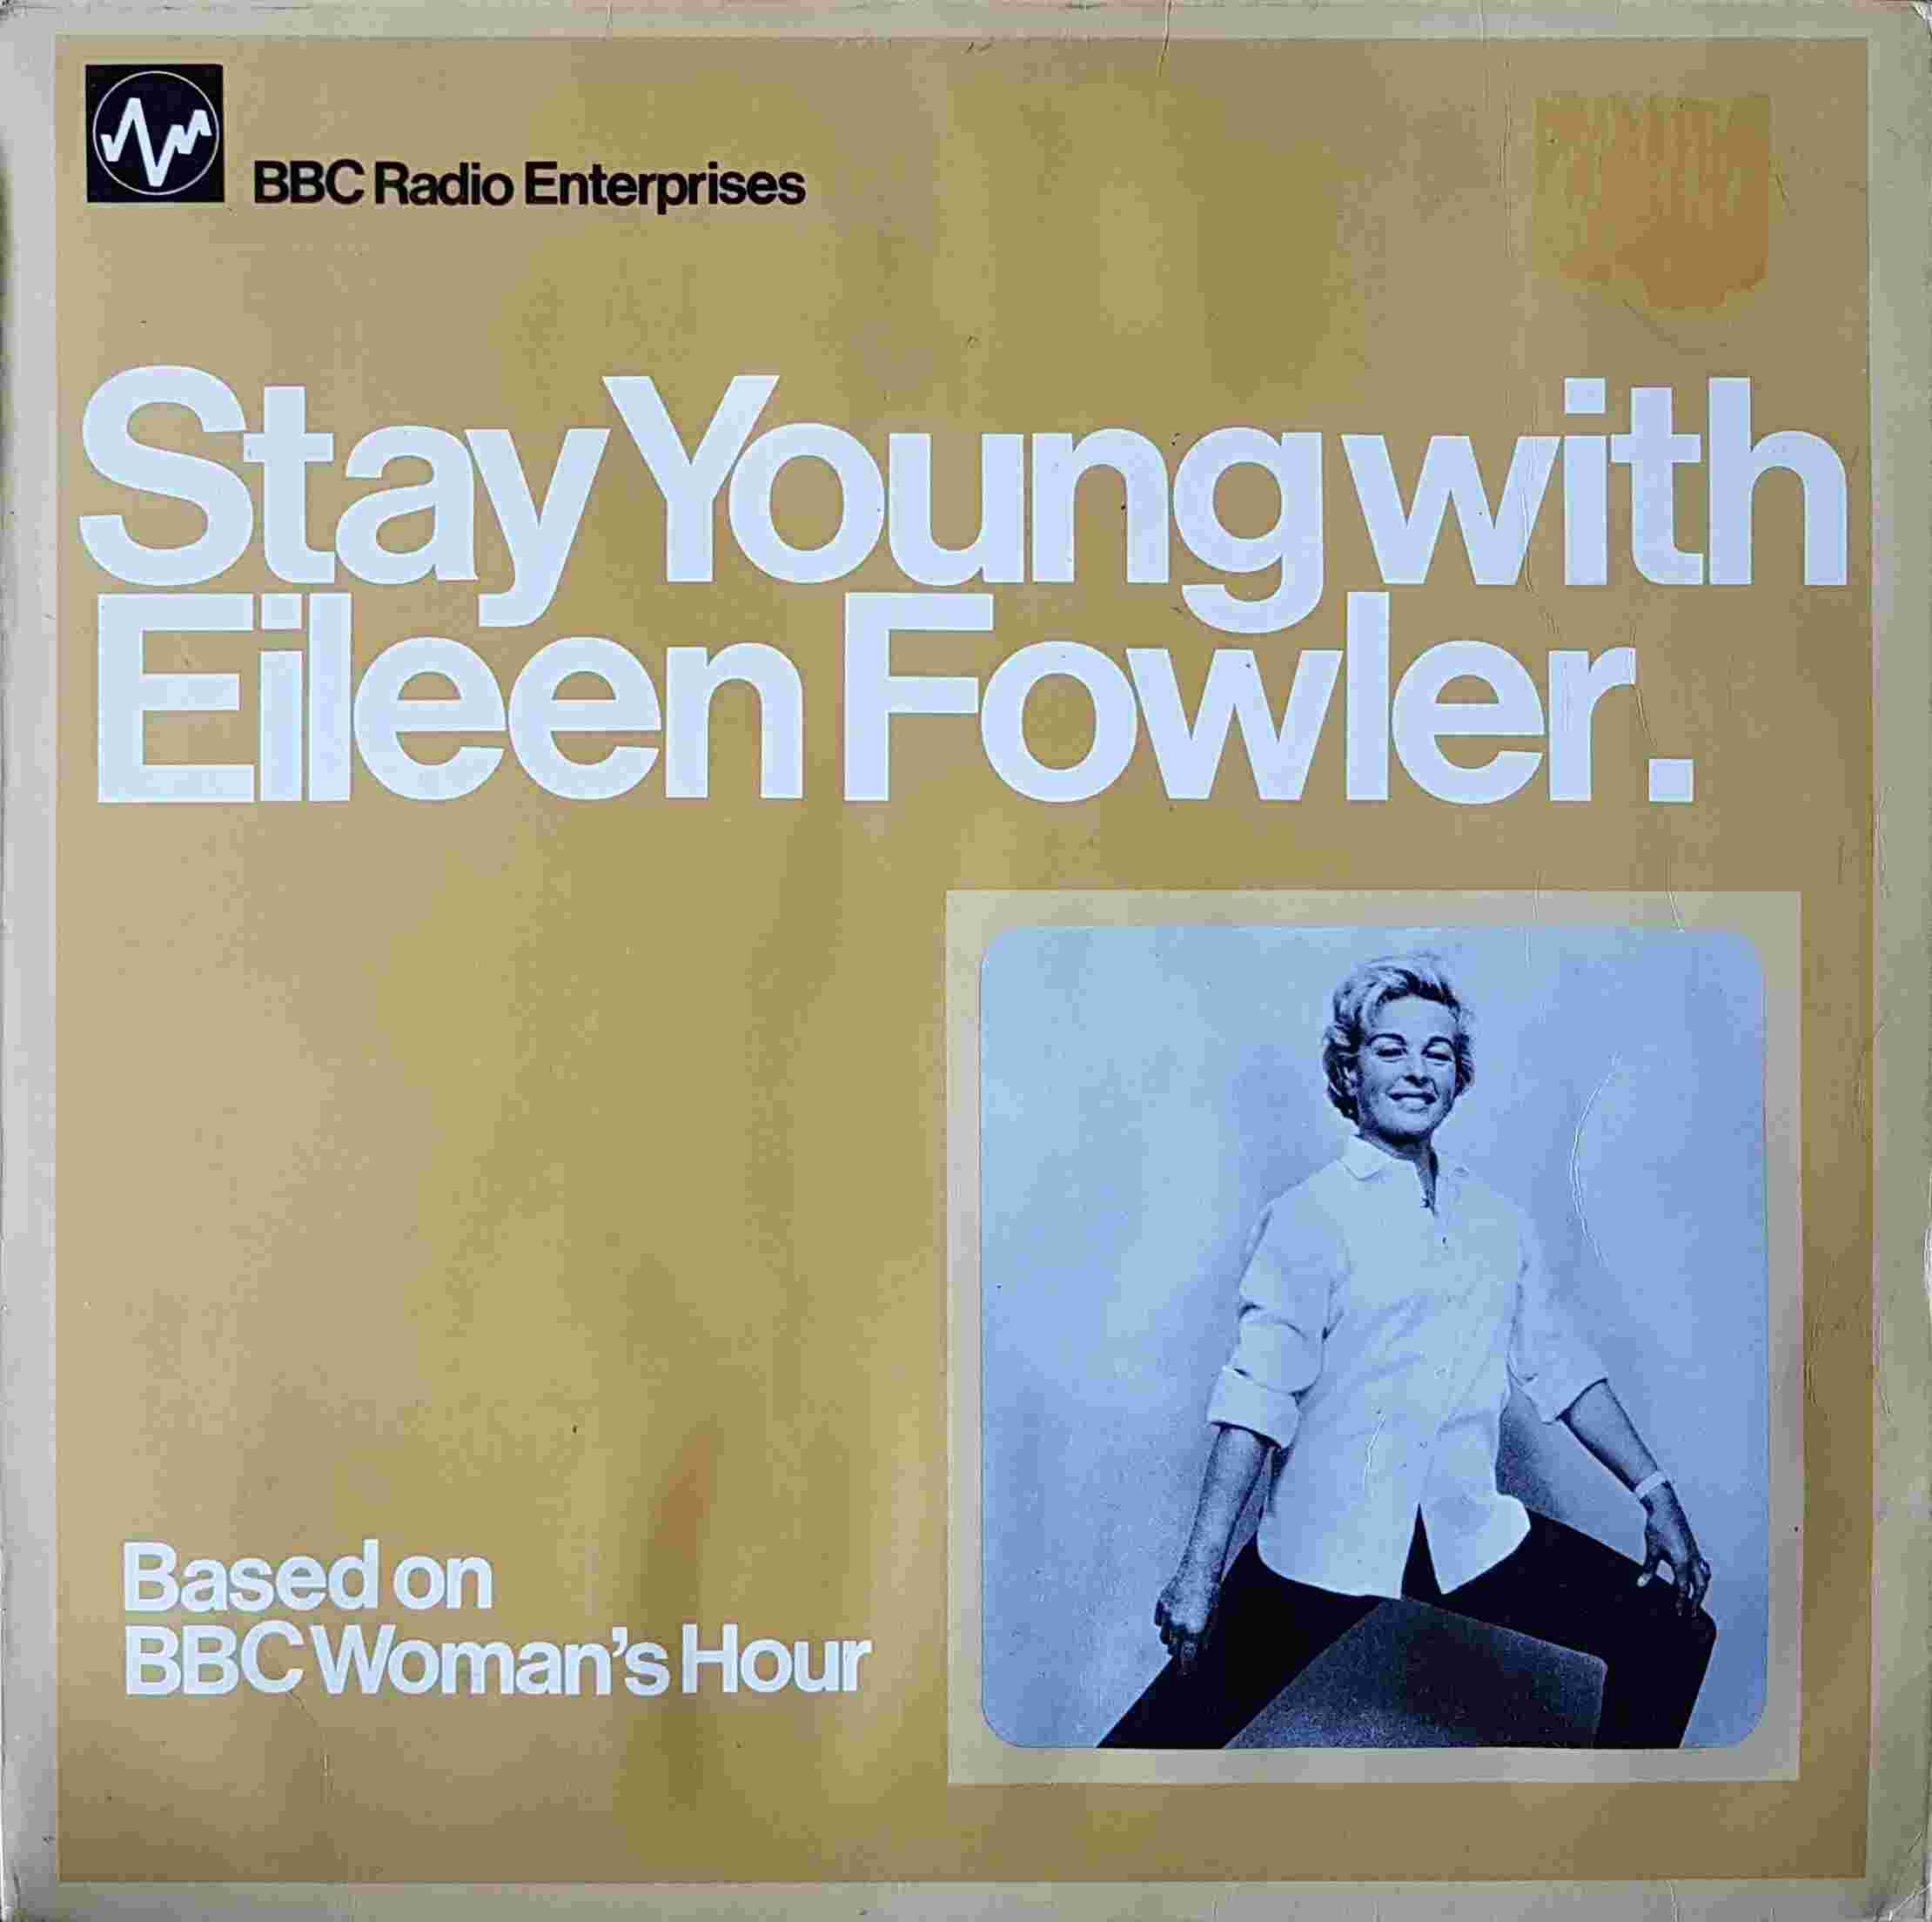 Picture of REC 18 Stay young with Eileen Fowler
 by artist Eileen Fowler from the BBC albums - Records and Tapes library